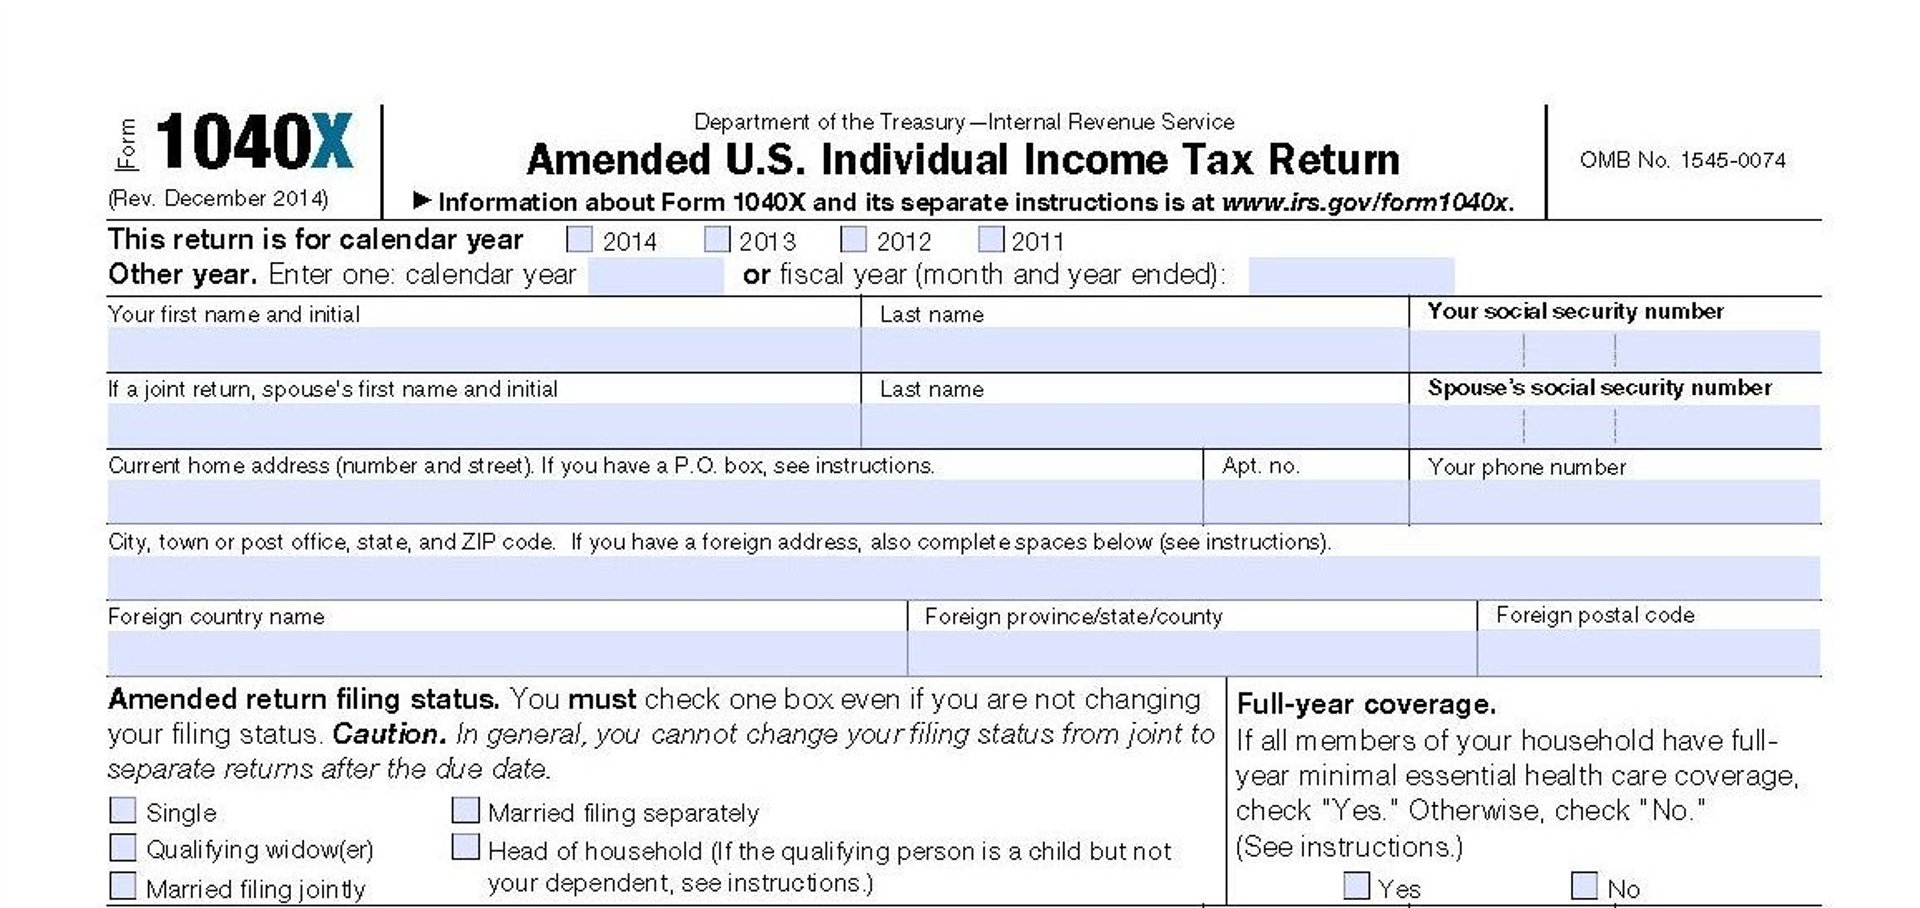 Correcting Mistakes After You File Amended Tax Returns